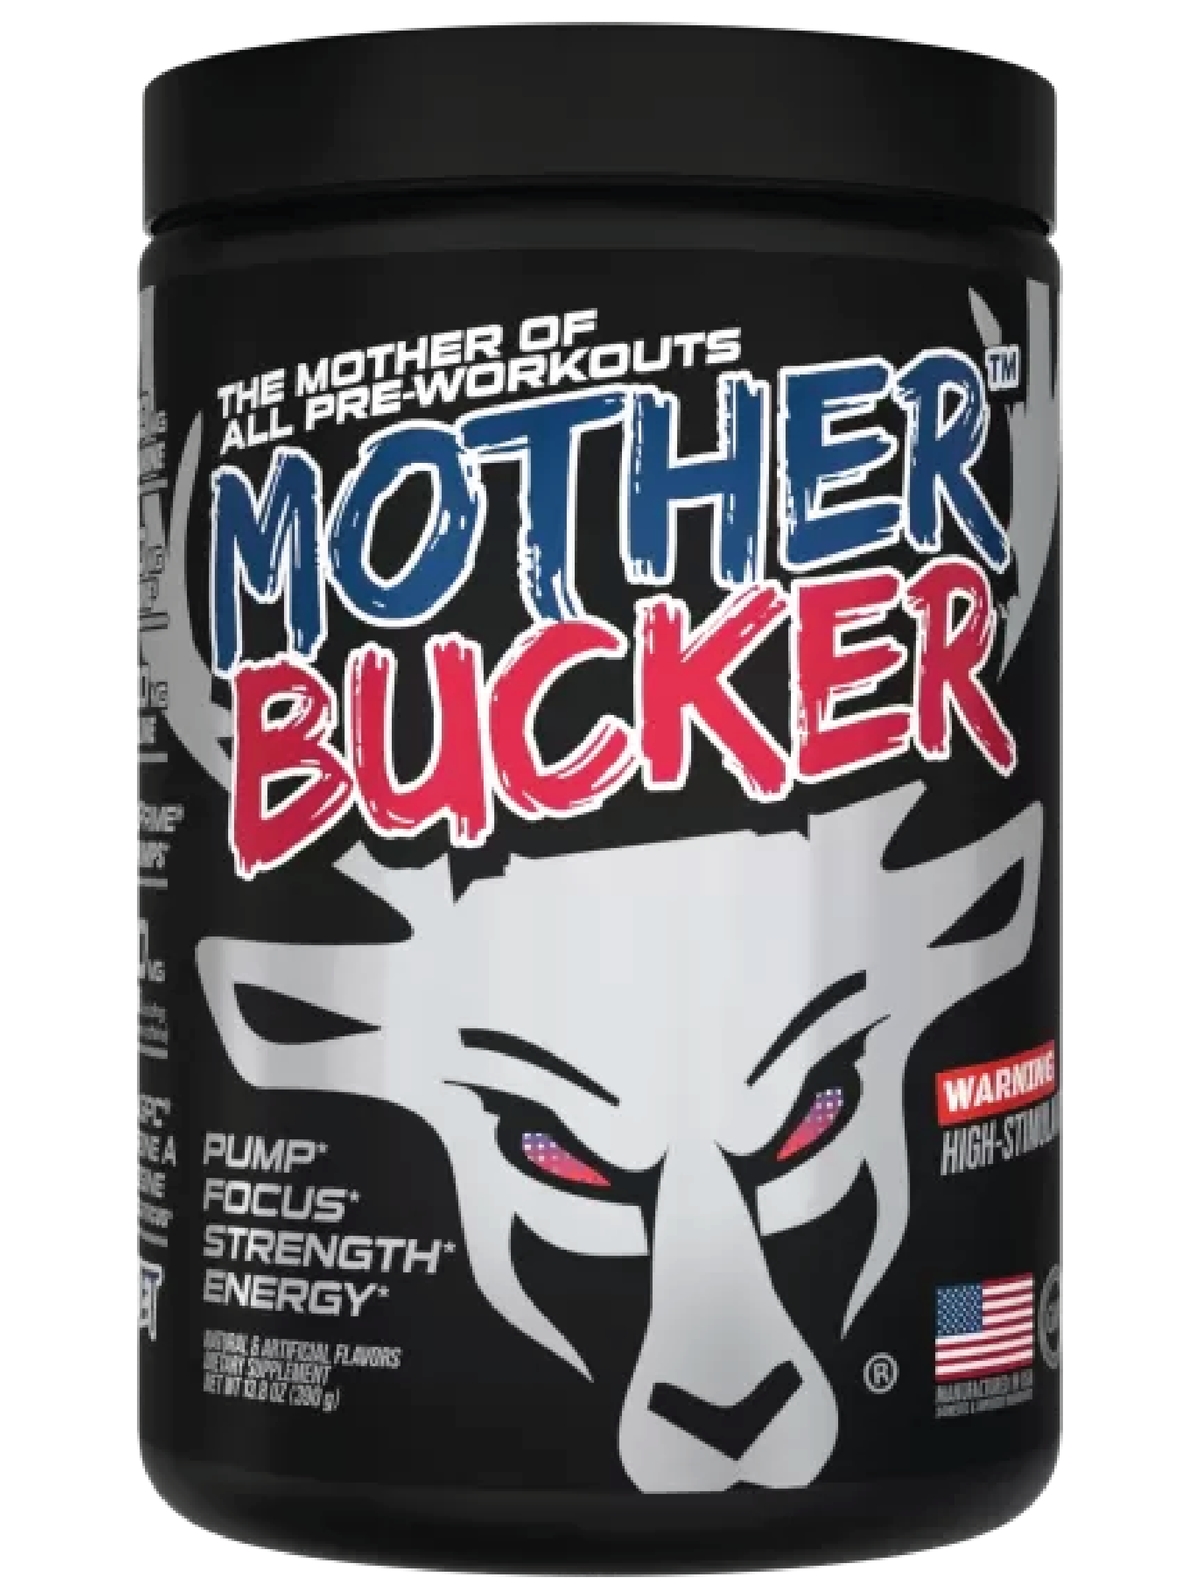 Mother Bucker Pre-Workout - Bucked Up